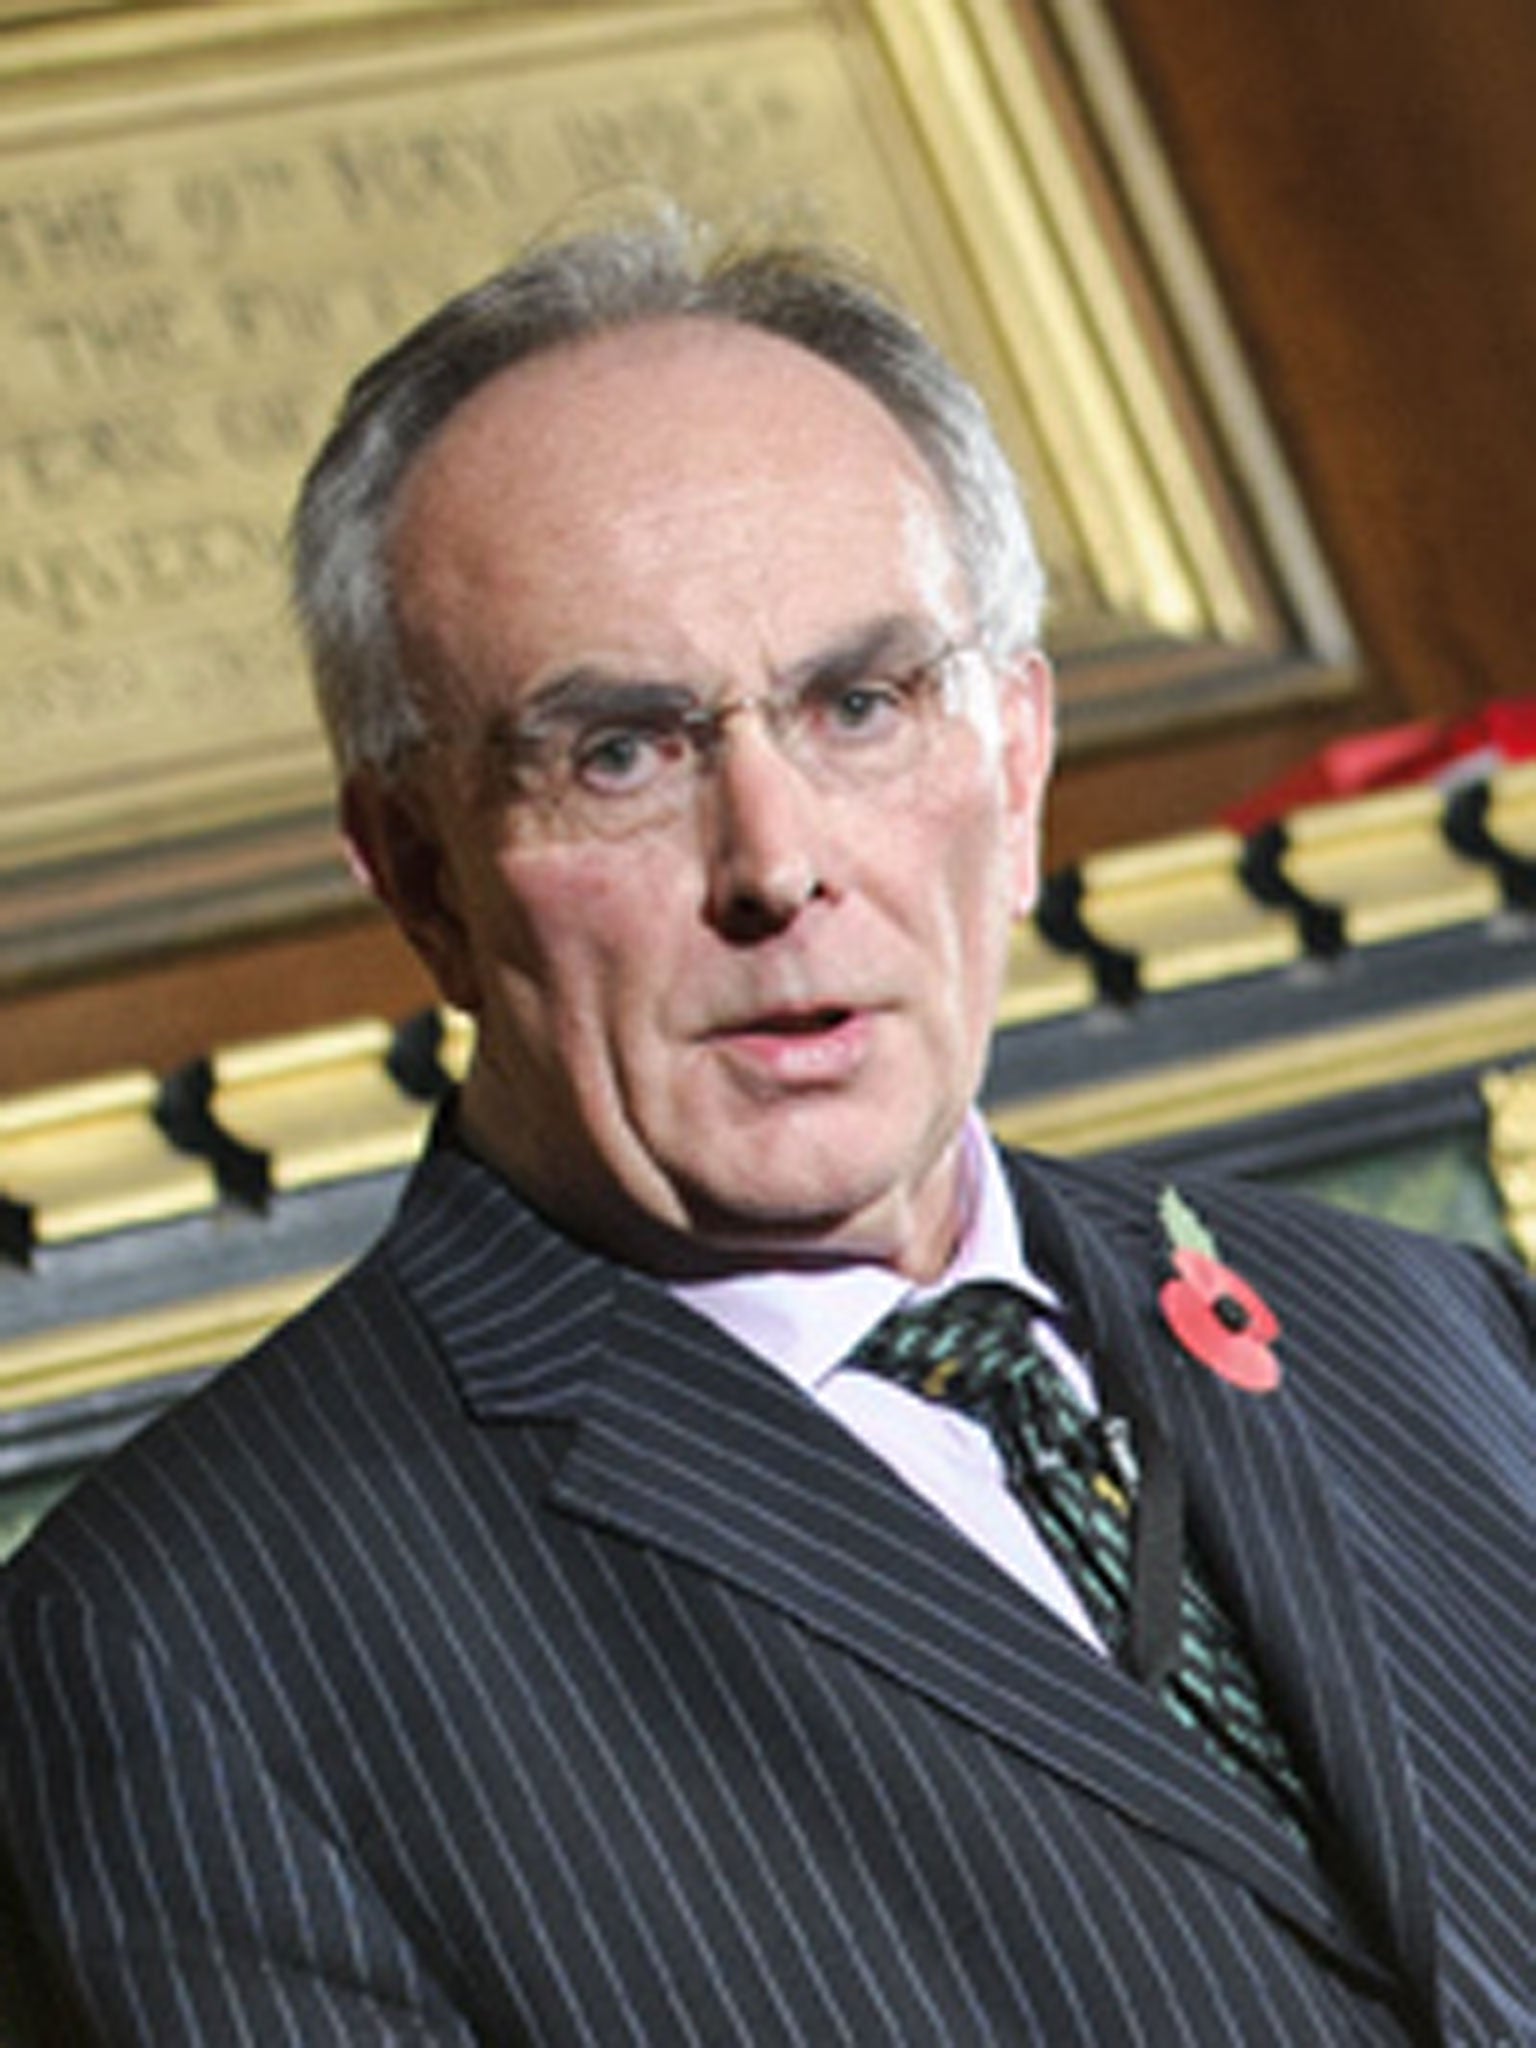 Peter Bone said that he was questioned by police about the funding of residential care for his mother-in-law